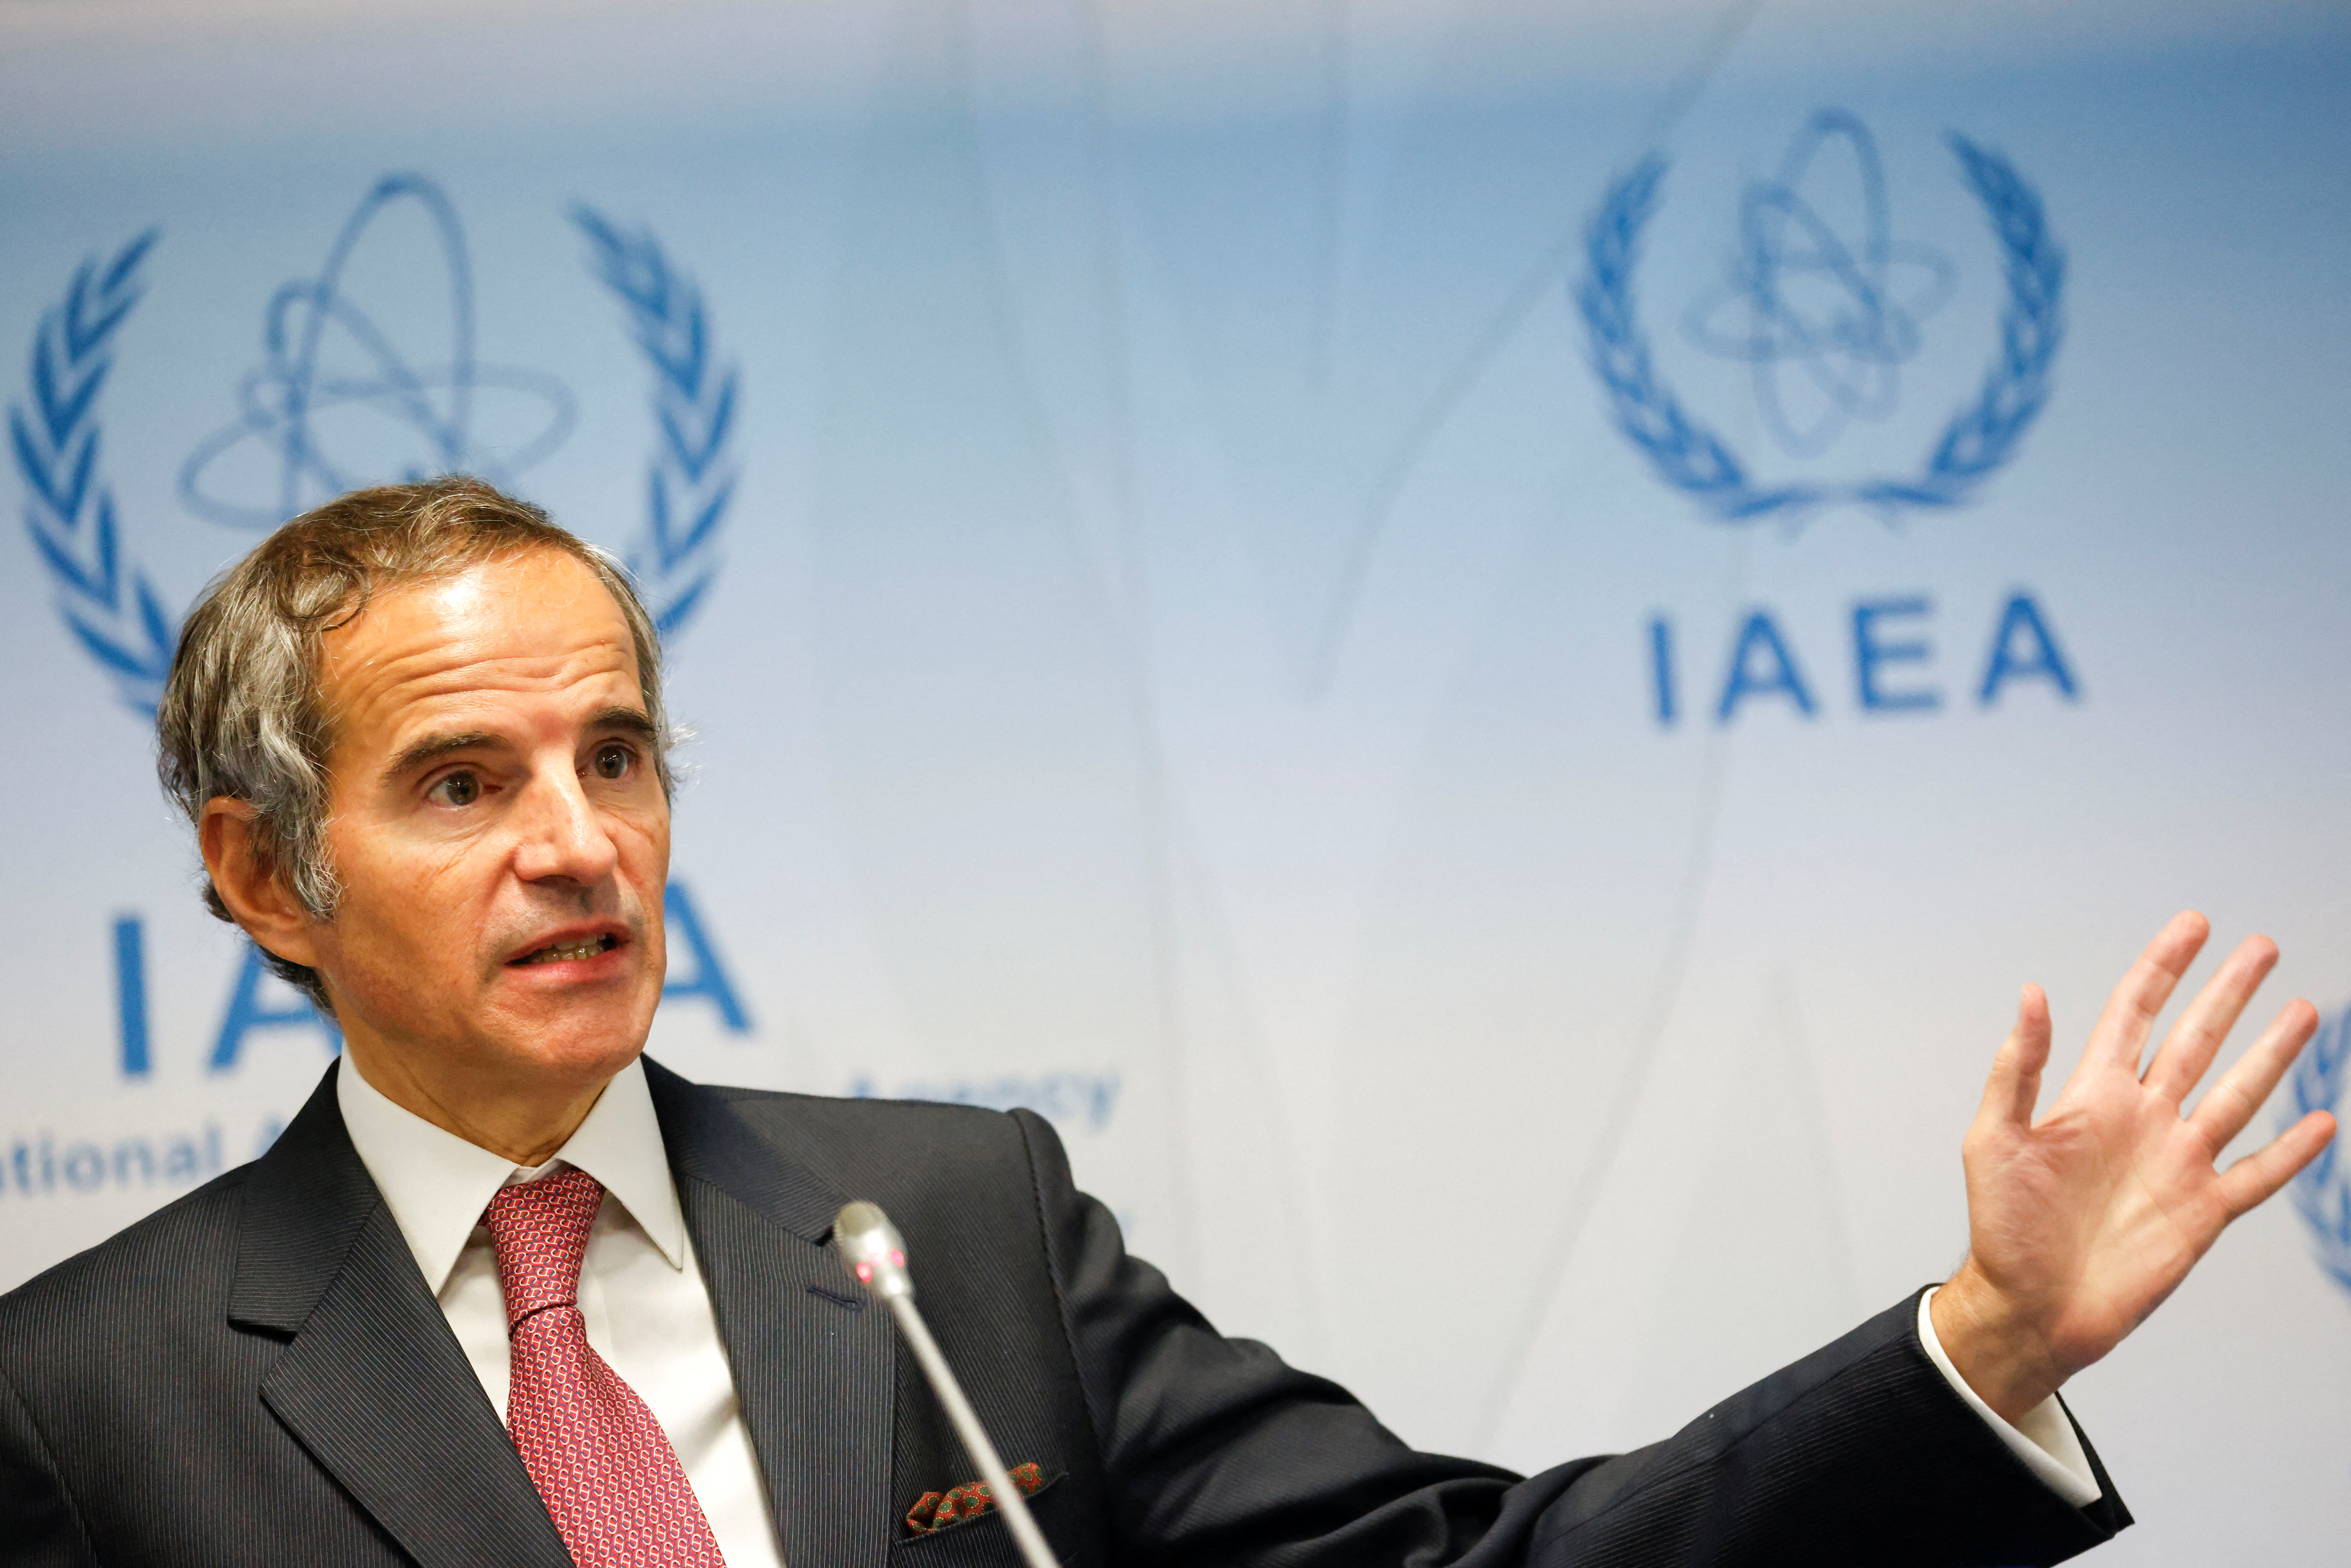 IAEA Director General Rafael Grossi holds a news conference in Vienna